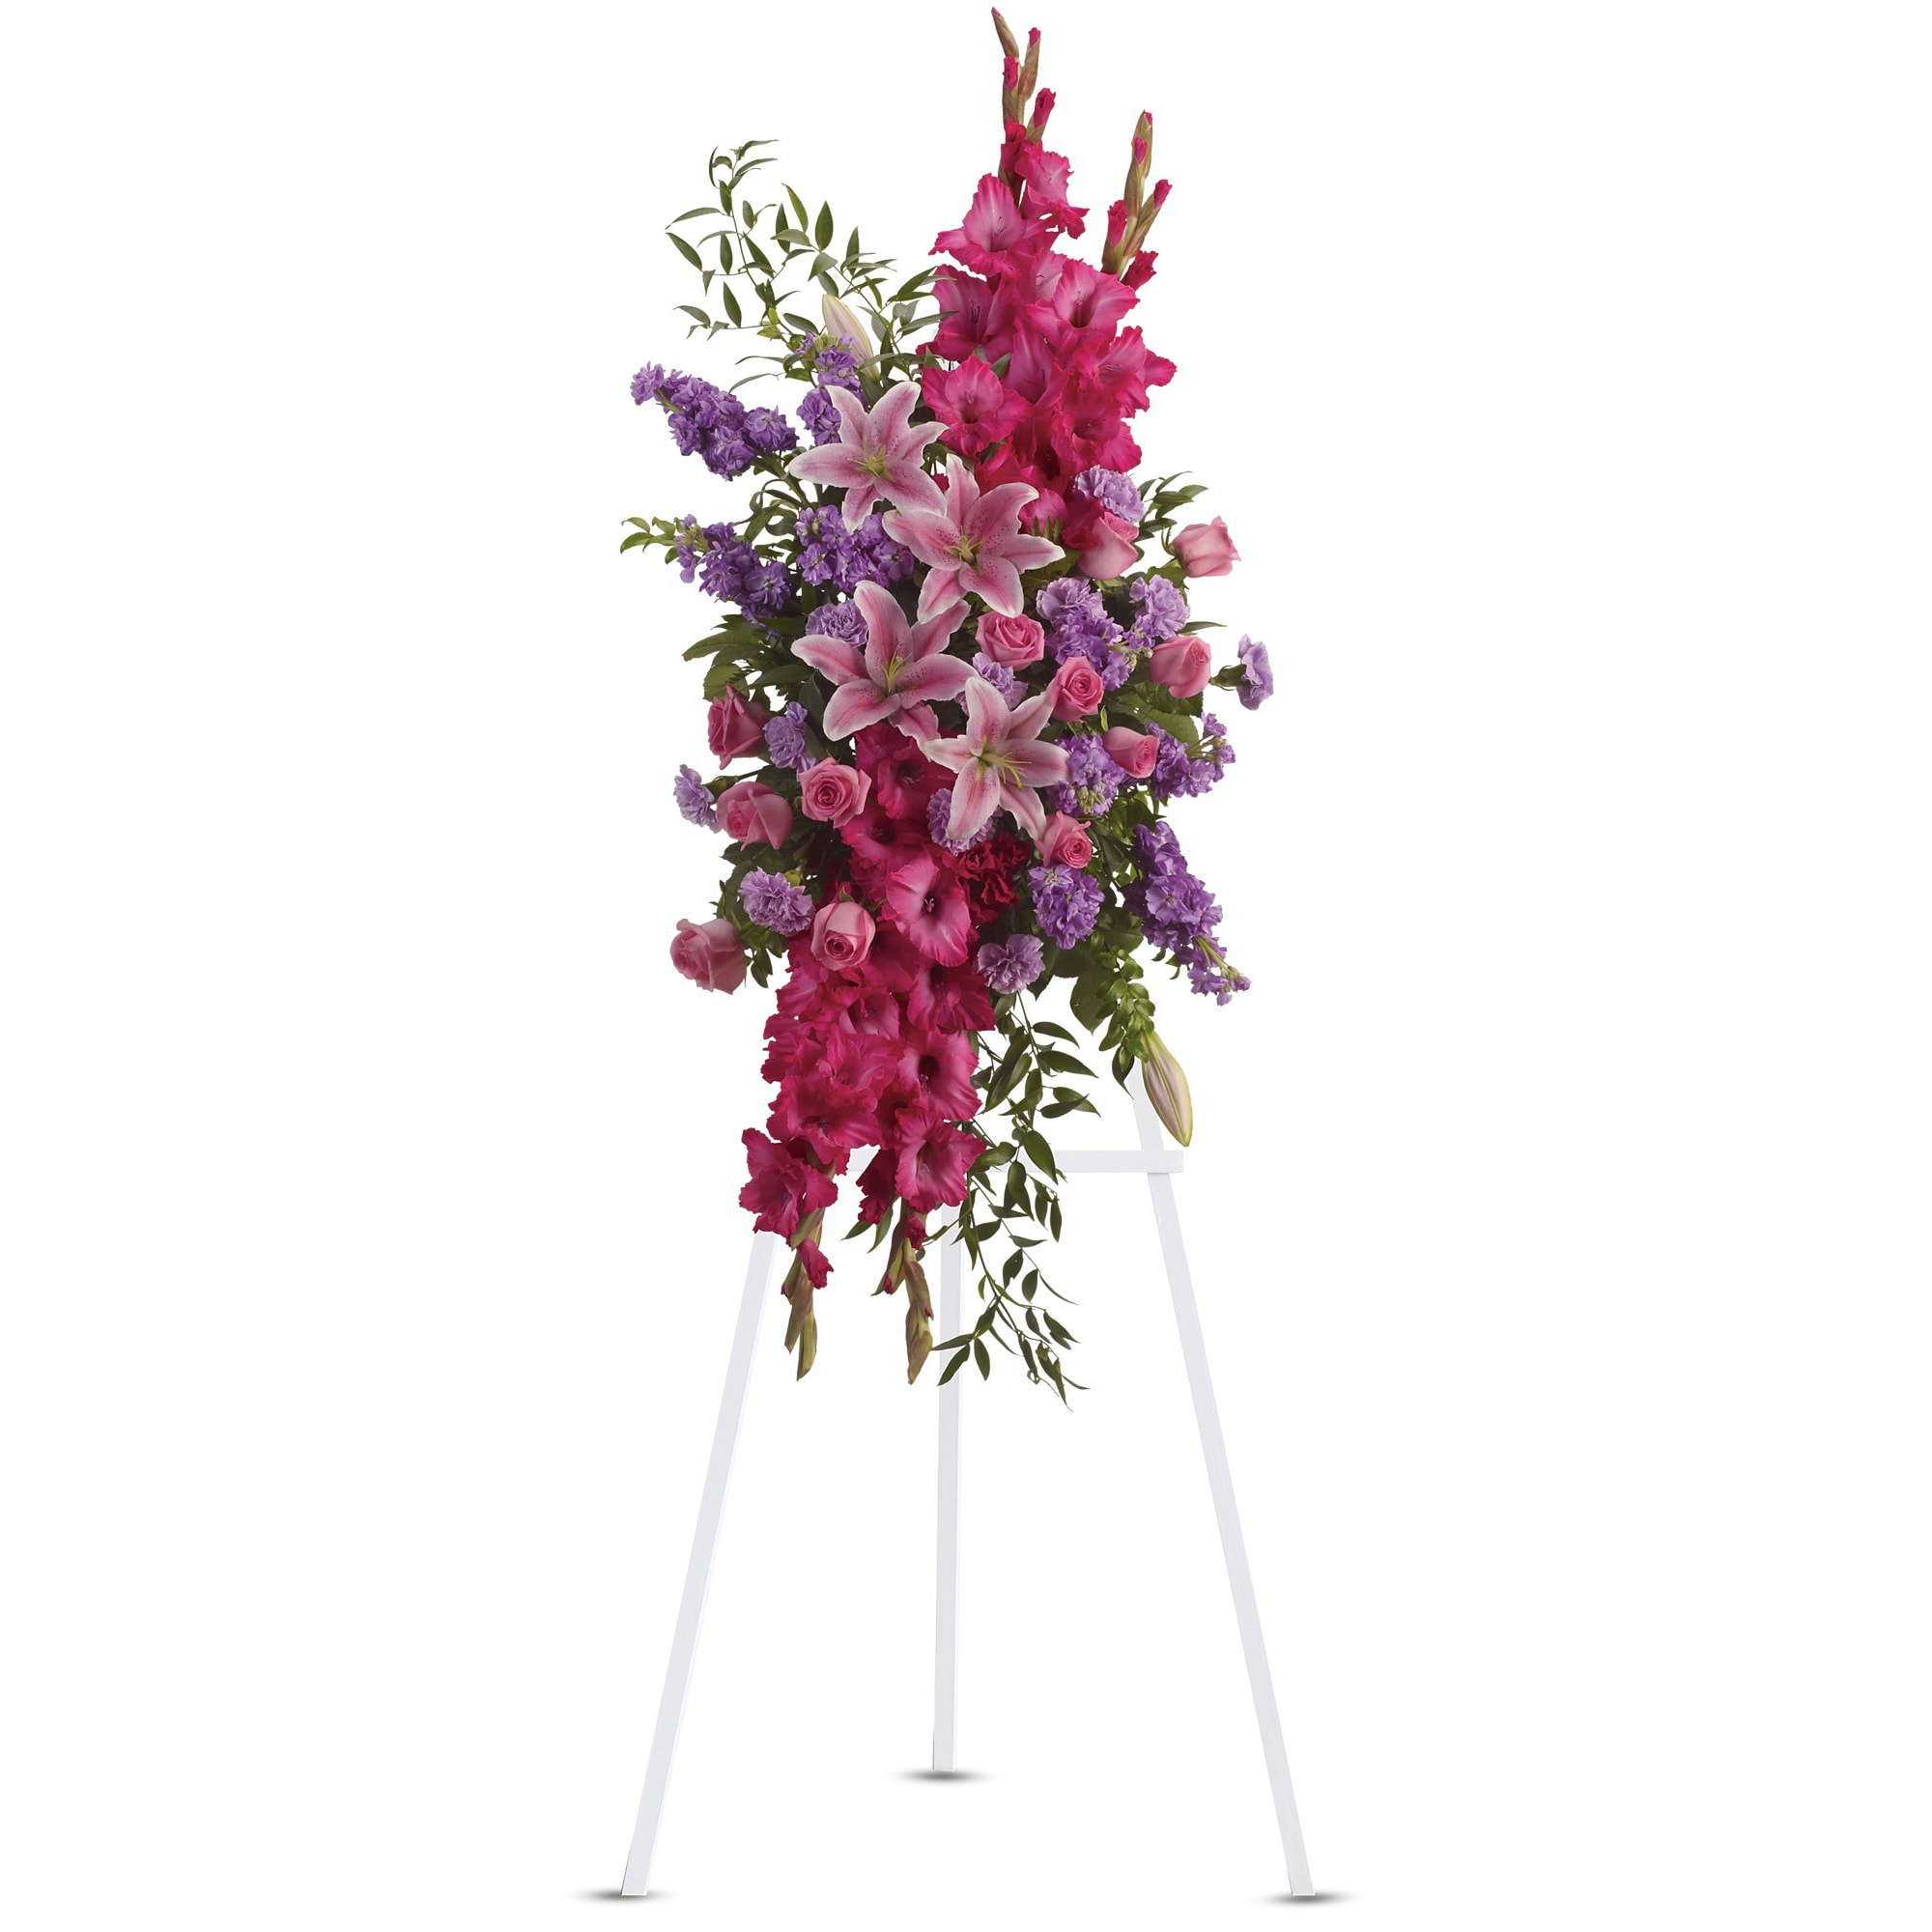 Touching Tribute Spray by Teleflora  - Express admiration for her beauty and spirit with a striking tribute certain to evoke many cherished remembrances.  